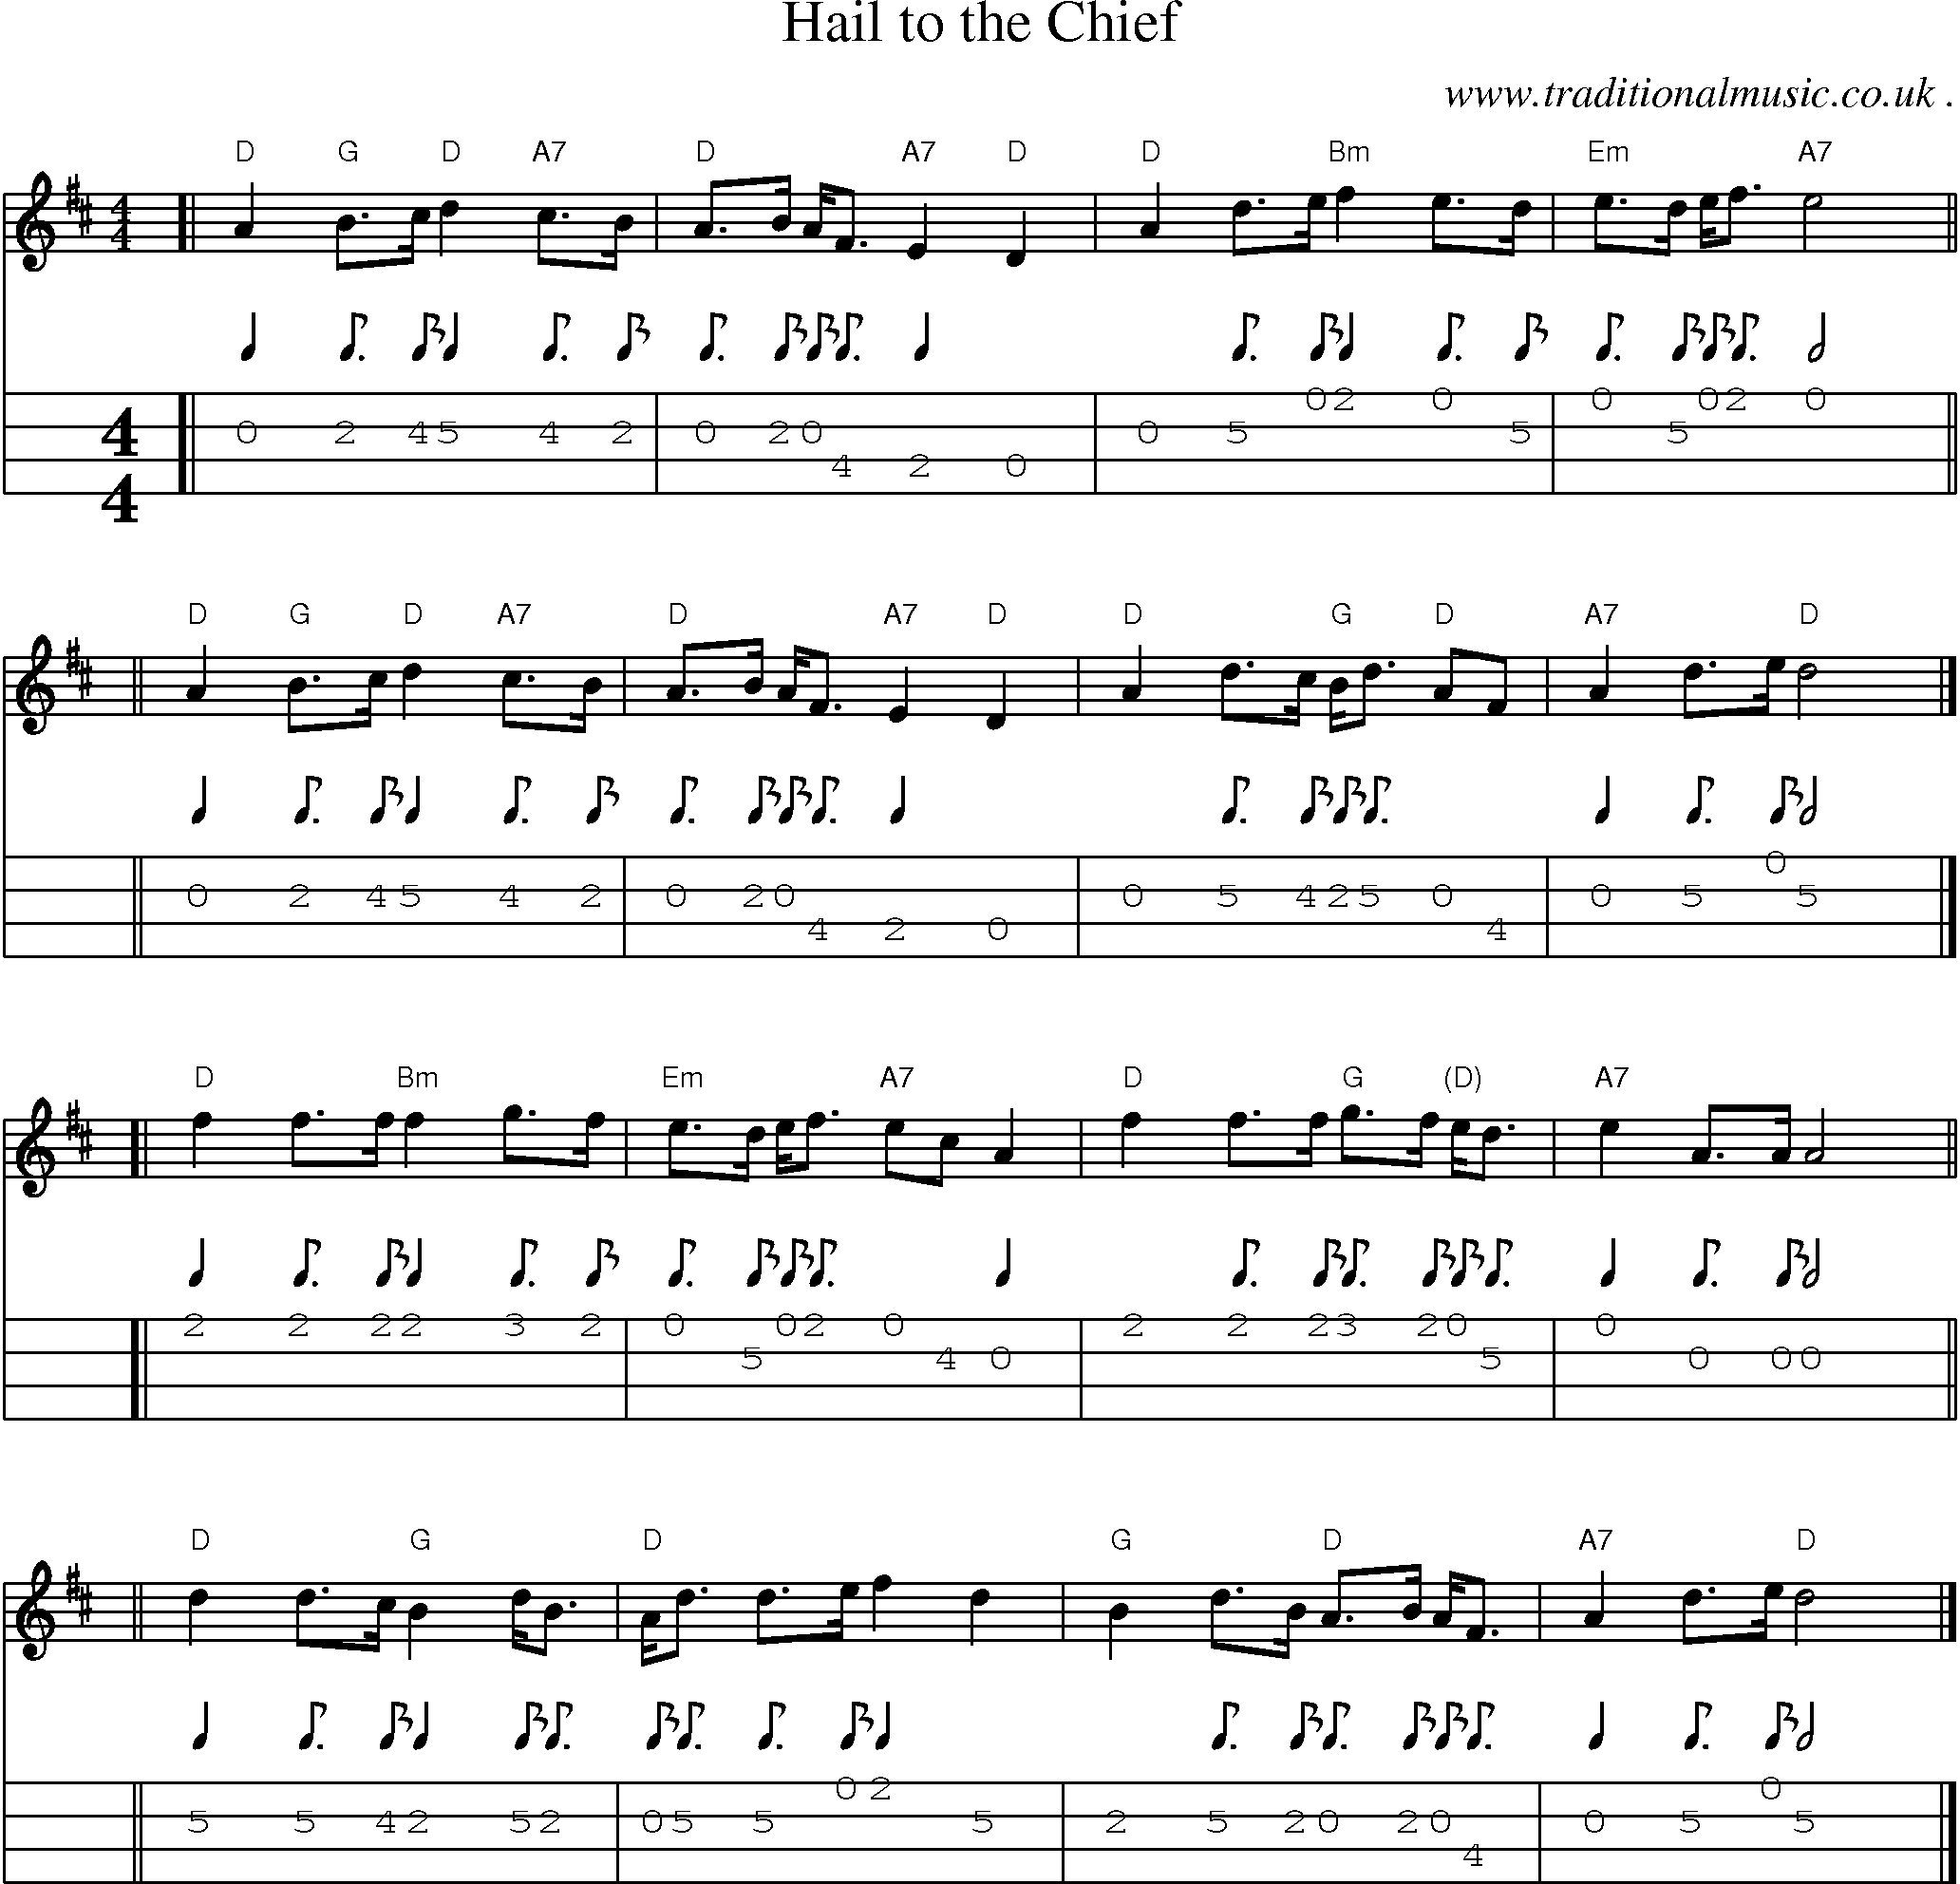 Sheet-music  score, Chords and Mandolin Tabs for Hail To The Chief